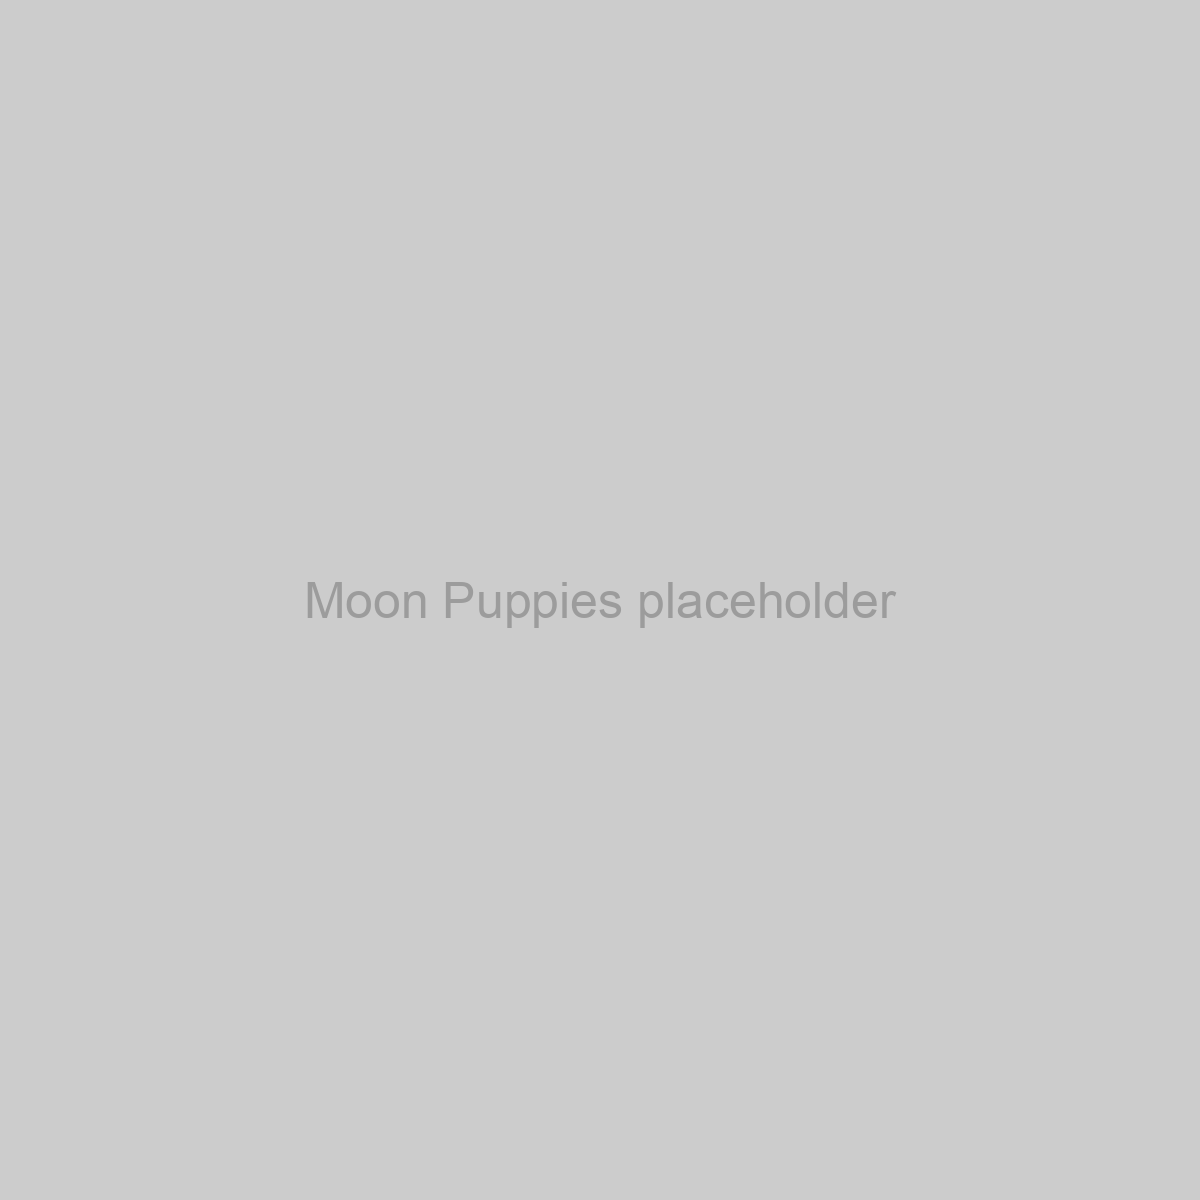 Moon Puppies Placeholder Image